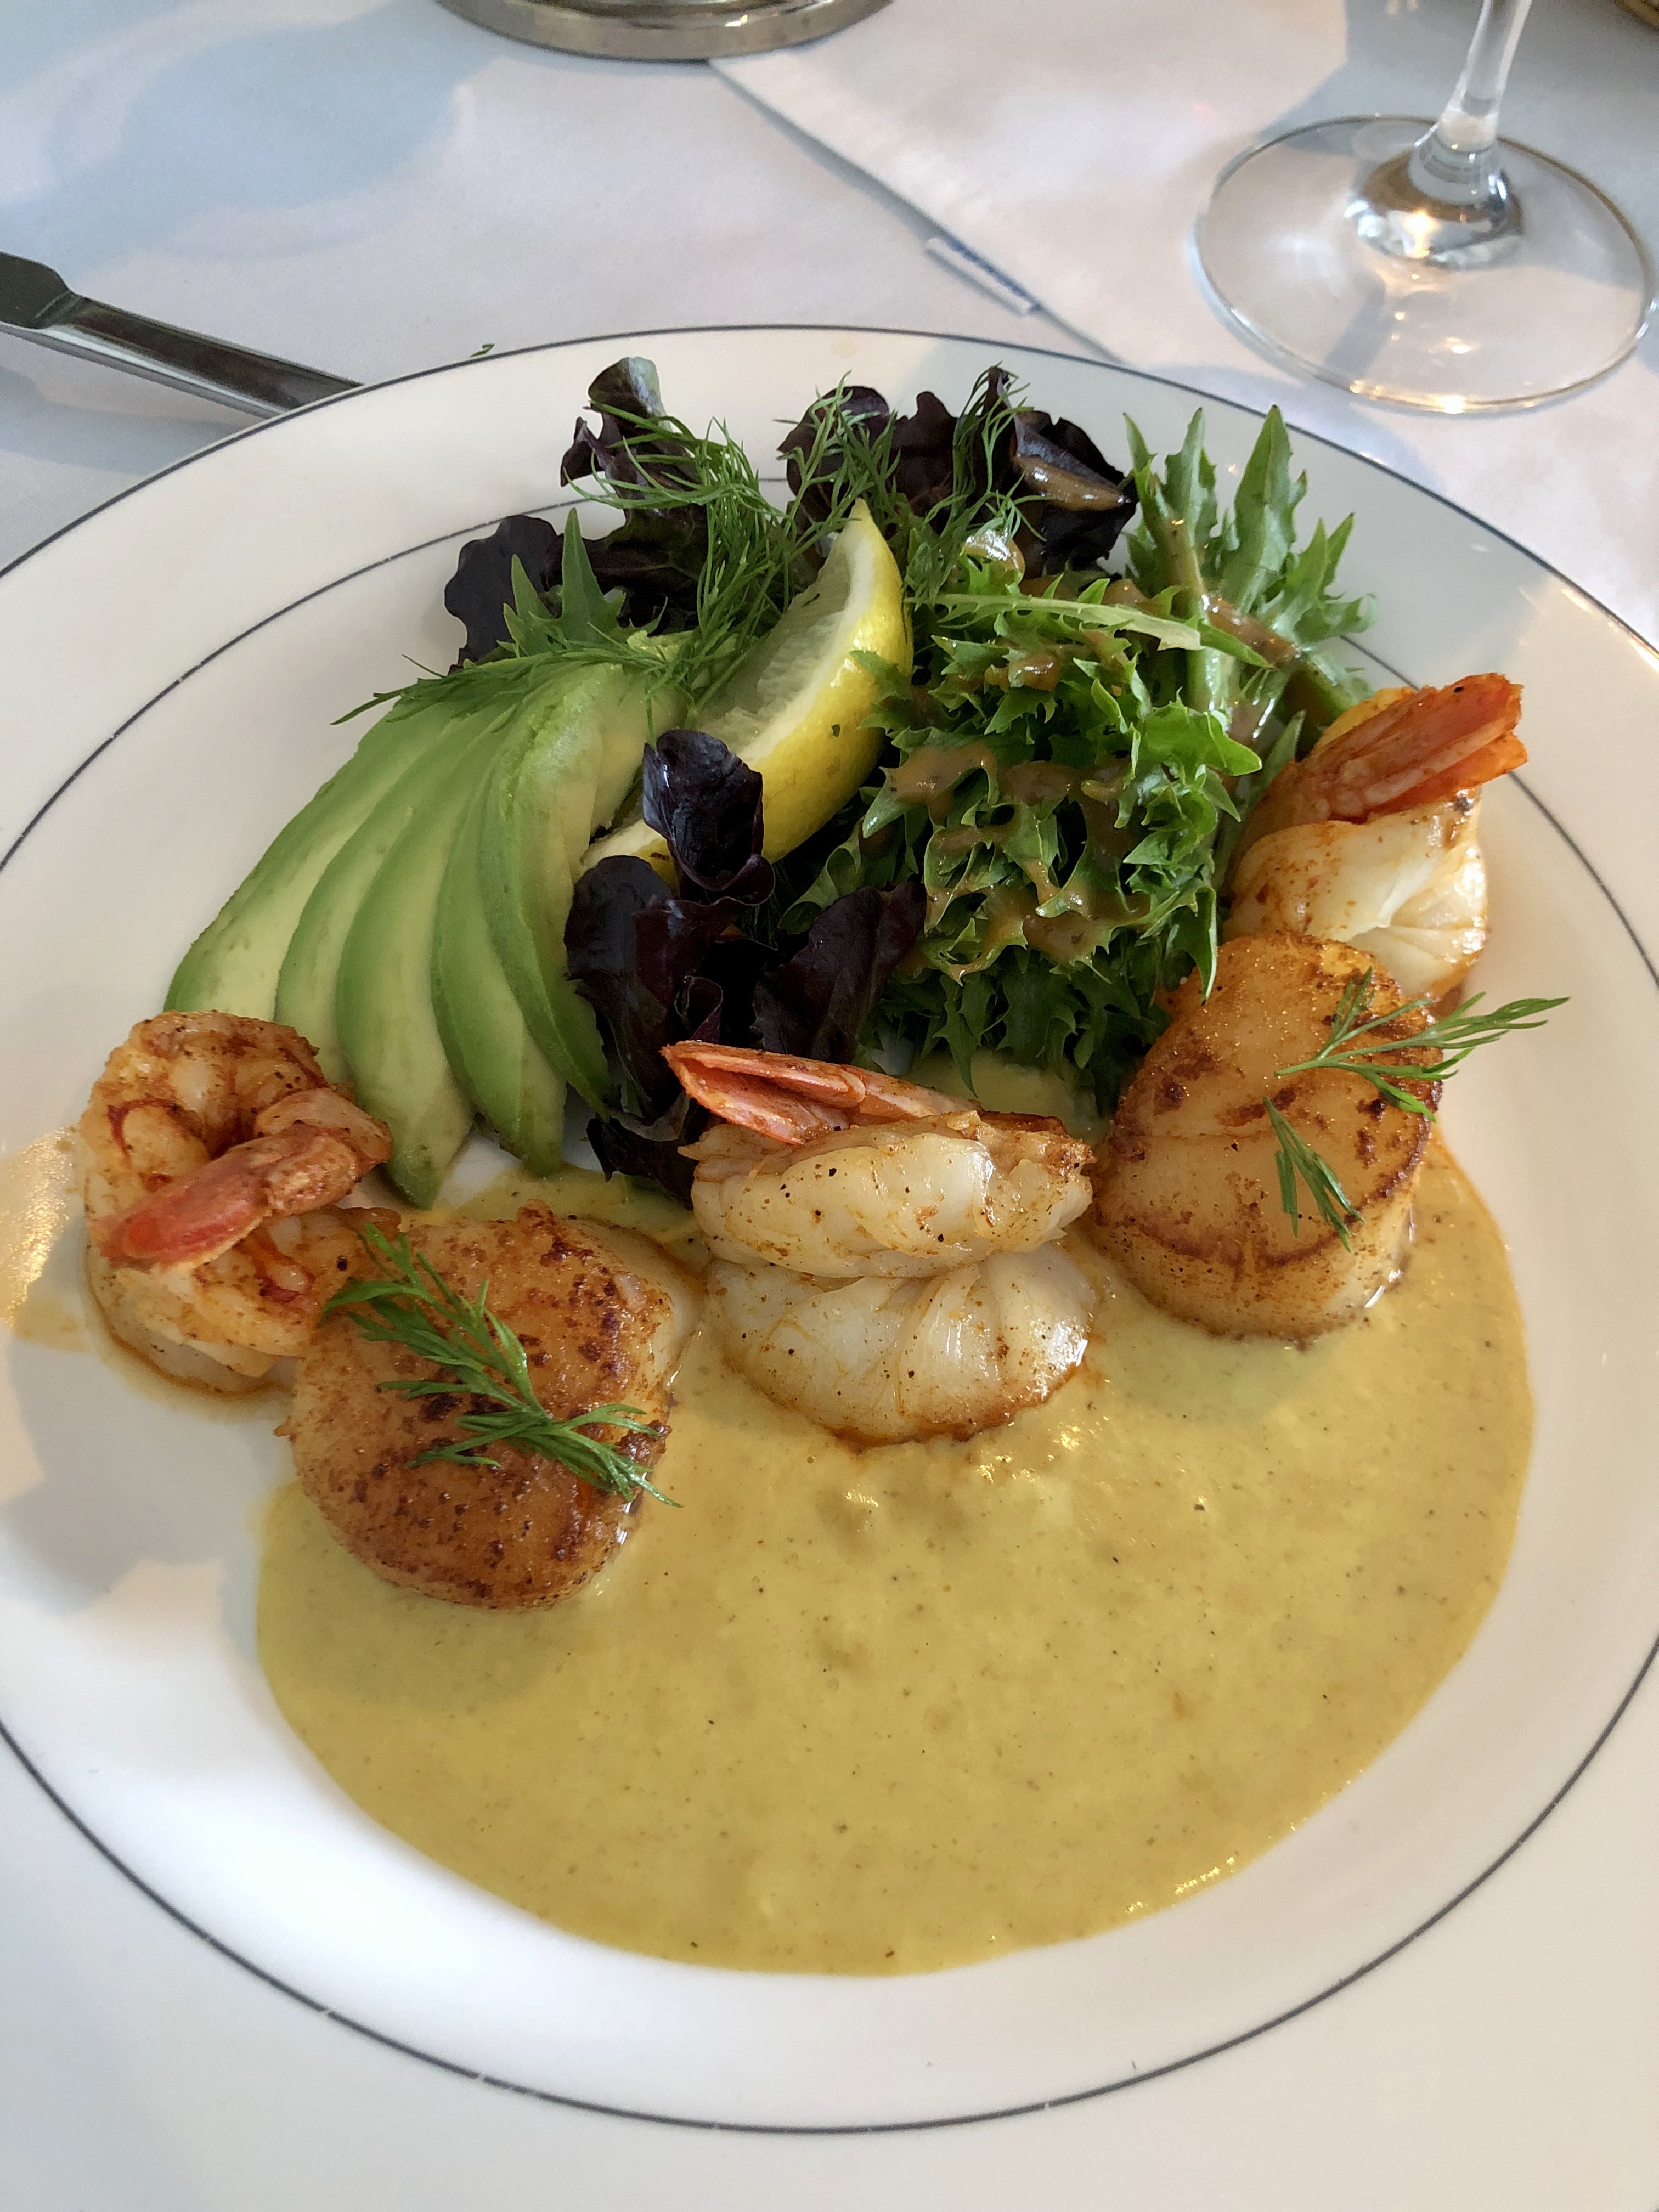 Warm Scallop and Shrimp Salad with Curried Mango Sauce